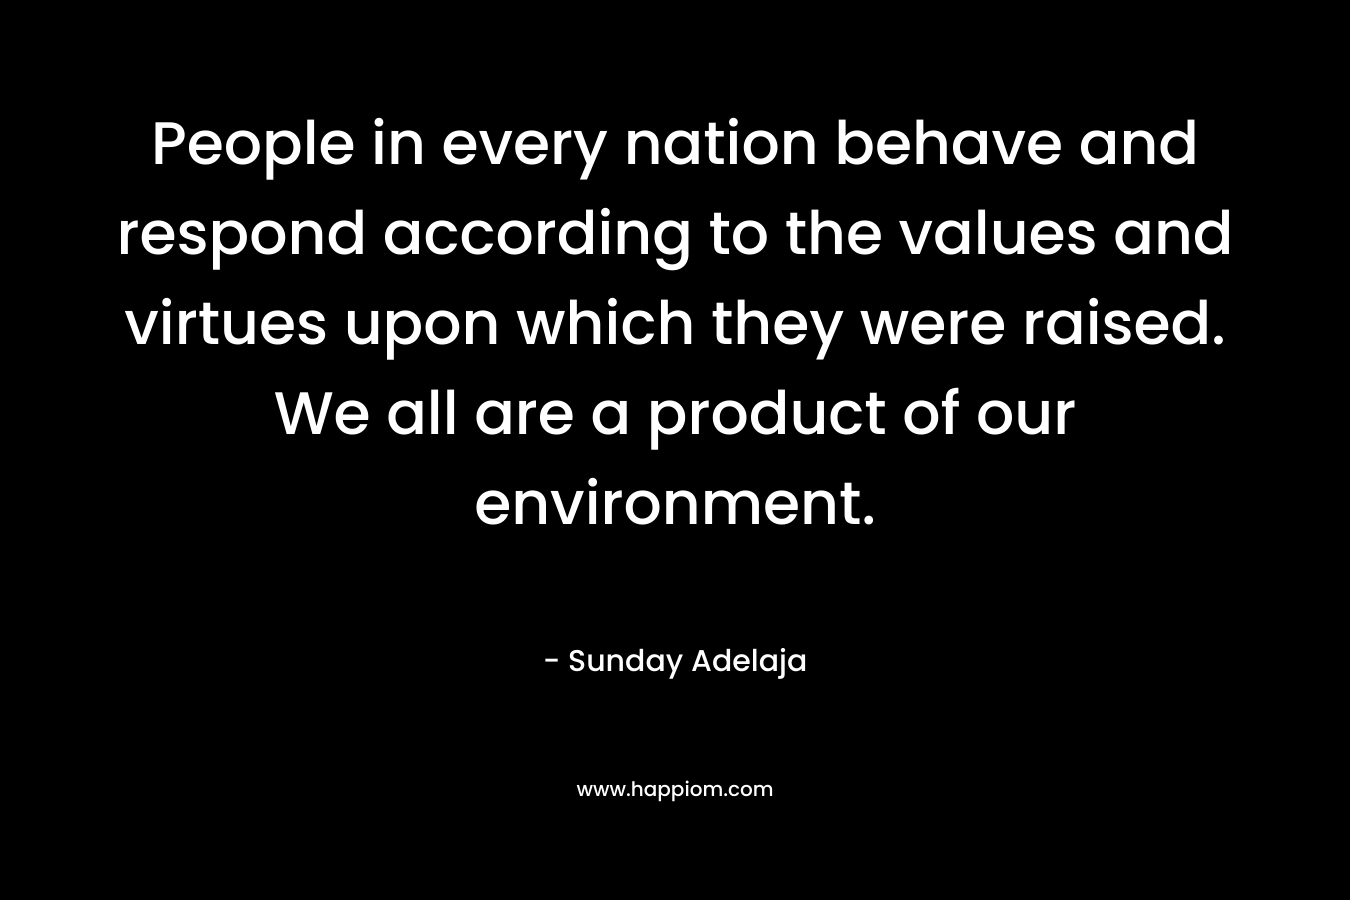 People in every nation behave and respond according to the values and virtues upon which they were raised. We all are a product of our environment.